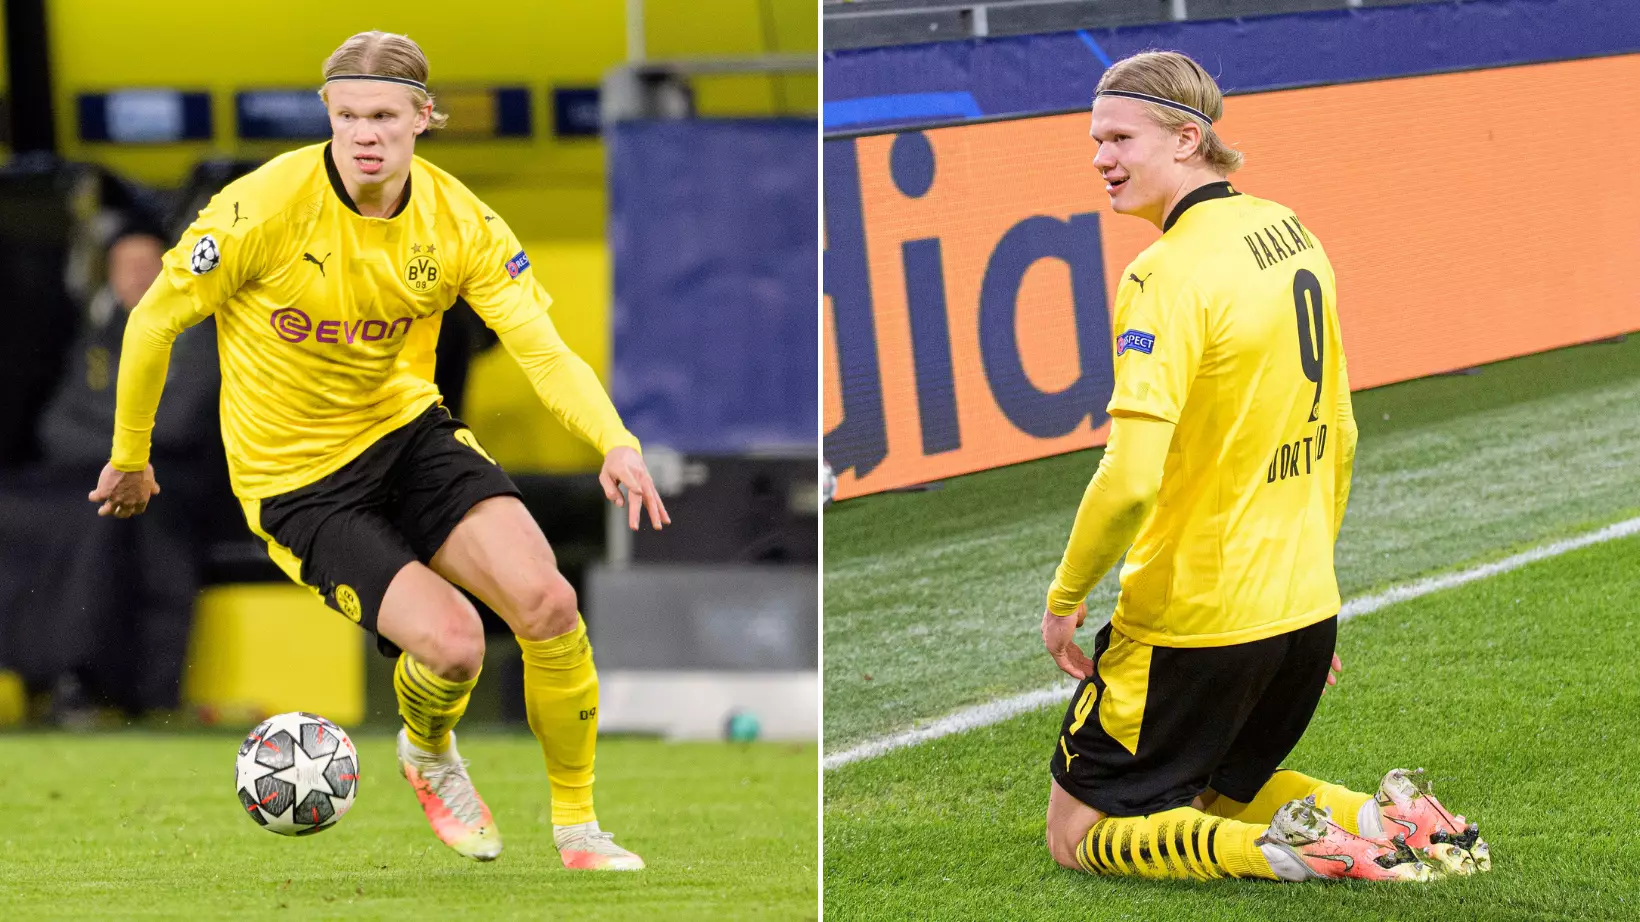 Erling Haaland Given Monstrous Price Tag By Borussia Dortmund Amid Transfer Speculation